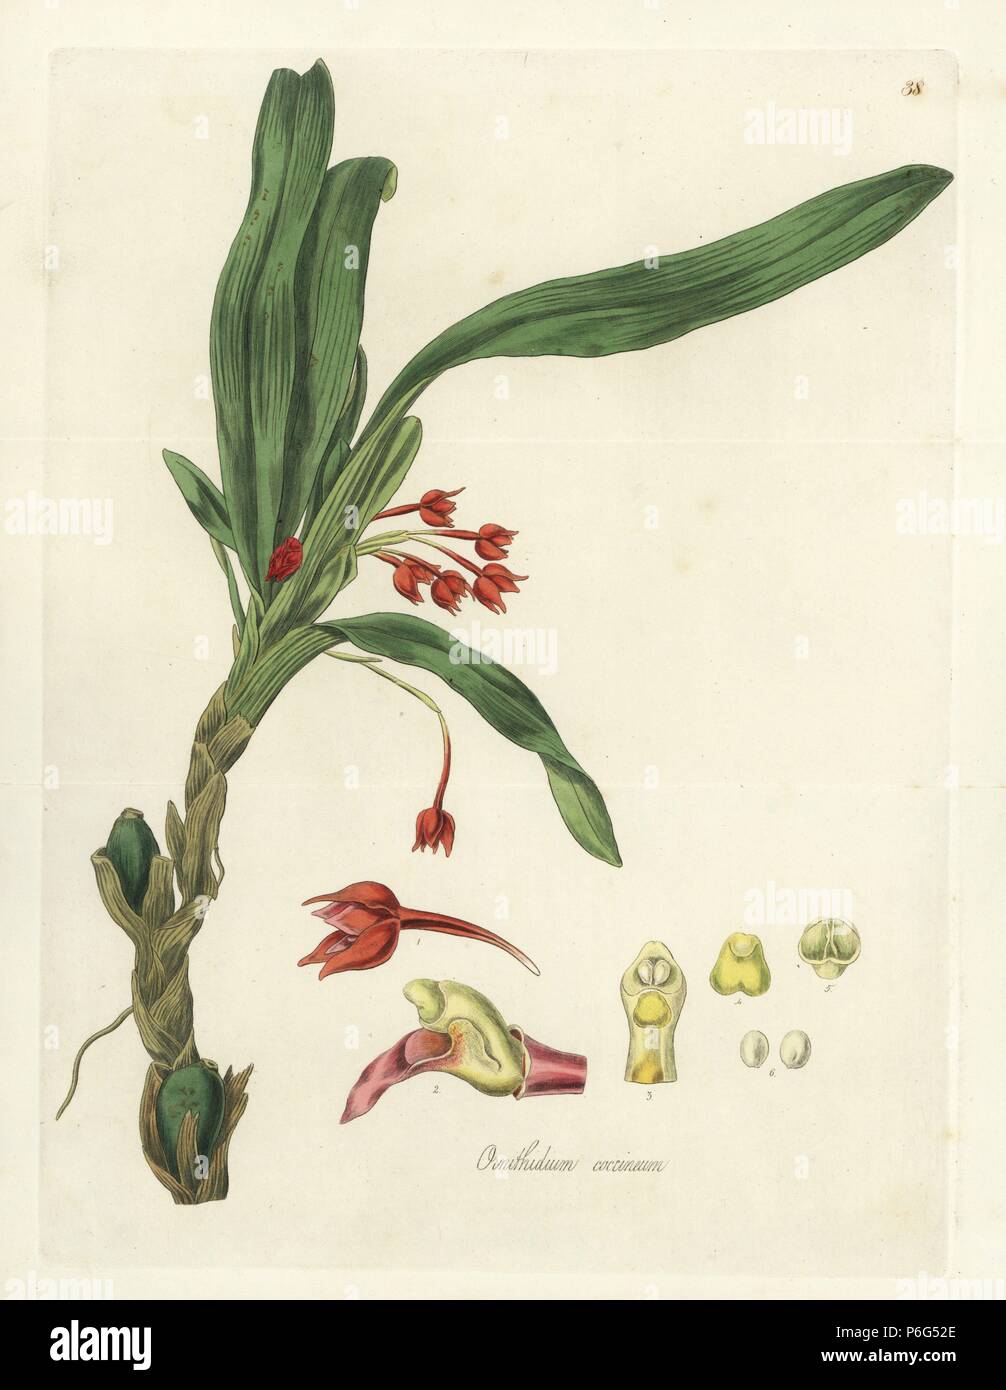 Flame orchid or scarlet ornithidium, Ornithidium coccineum. Handcoloured copperplate engraving by J. Swan after a botanical illustration by William Jackson Hooker from his own 'Exotic Flora,' Blackwood, Edinburgh, 1823. Hooker (1785-1865) was an English botanist who specialized in orchids and ferns, and was director of the Royal Botanical Gardens at Kew from 1841. Stock Photo